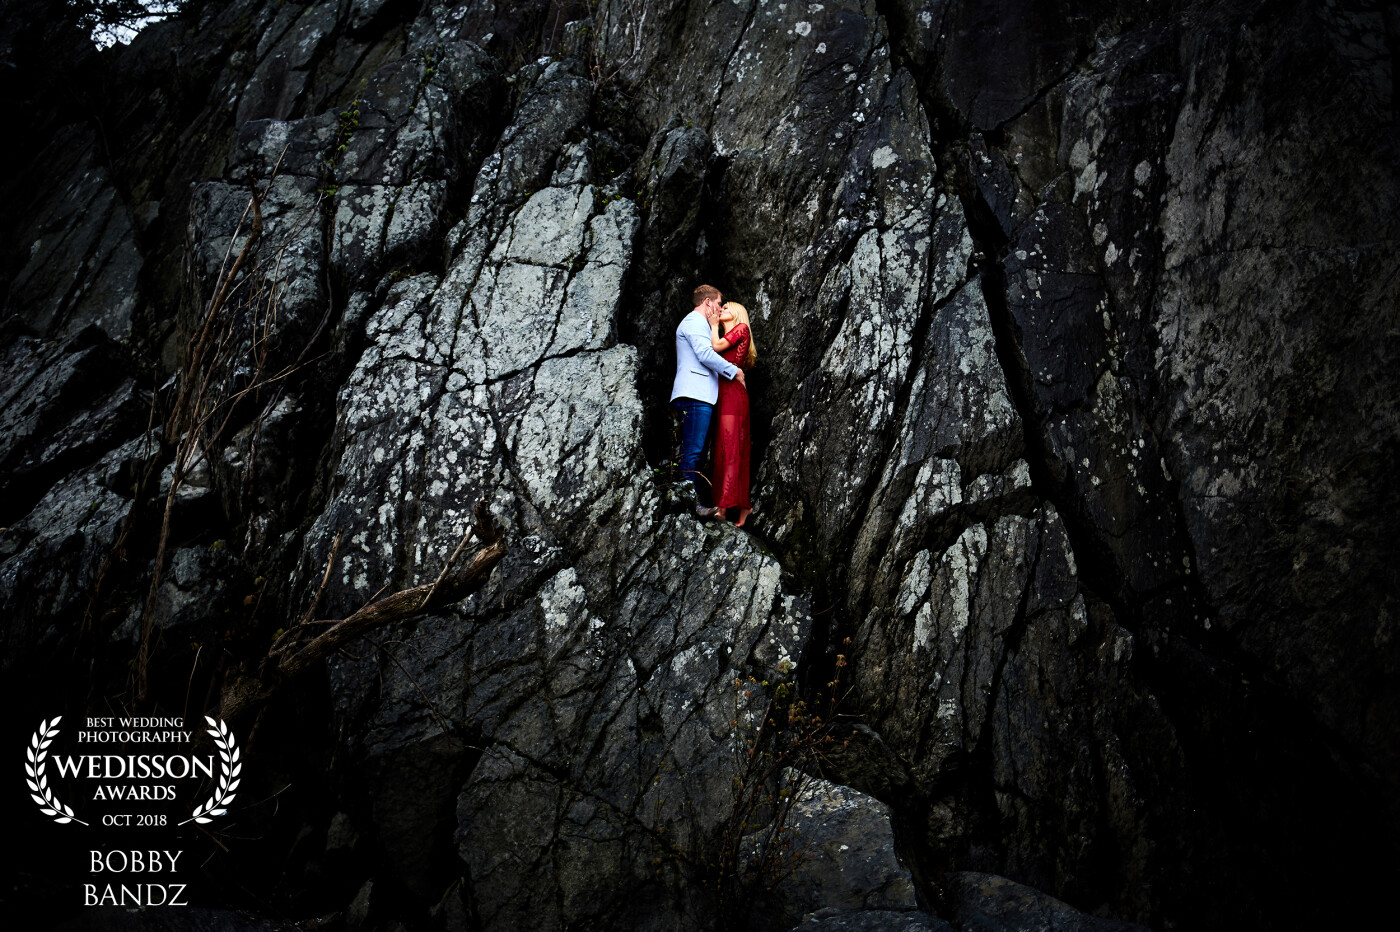 I found this nook in the side of the rock wall overlooking the rapids and told my couple to have a little private time up there! It almost looks like I photoshopped them in but they were willing to climb up and hold each other for stability while I shot away! I love how they pop off the stone. Another amazing memory capture with another amazing couple!